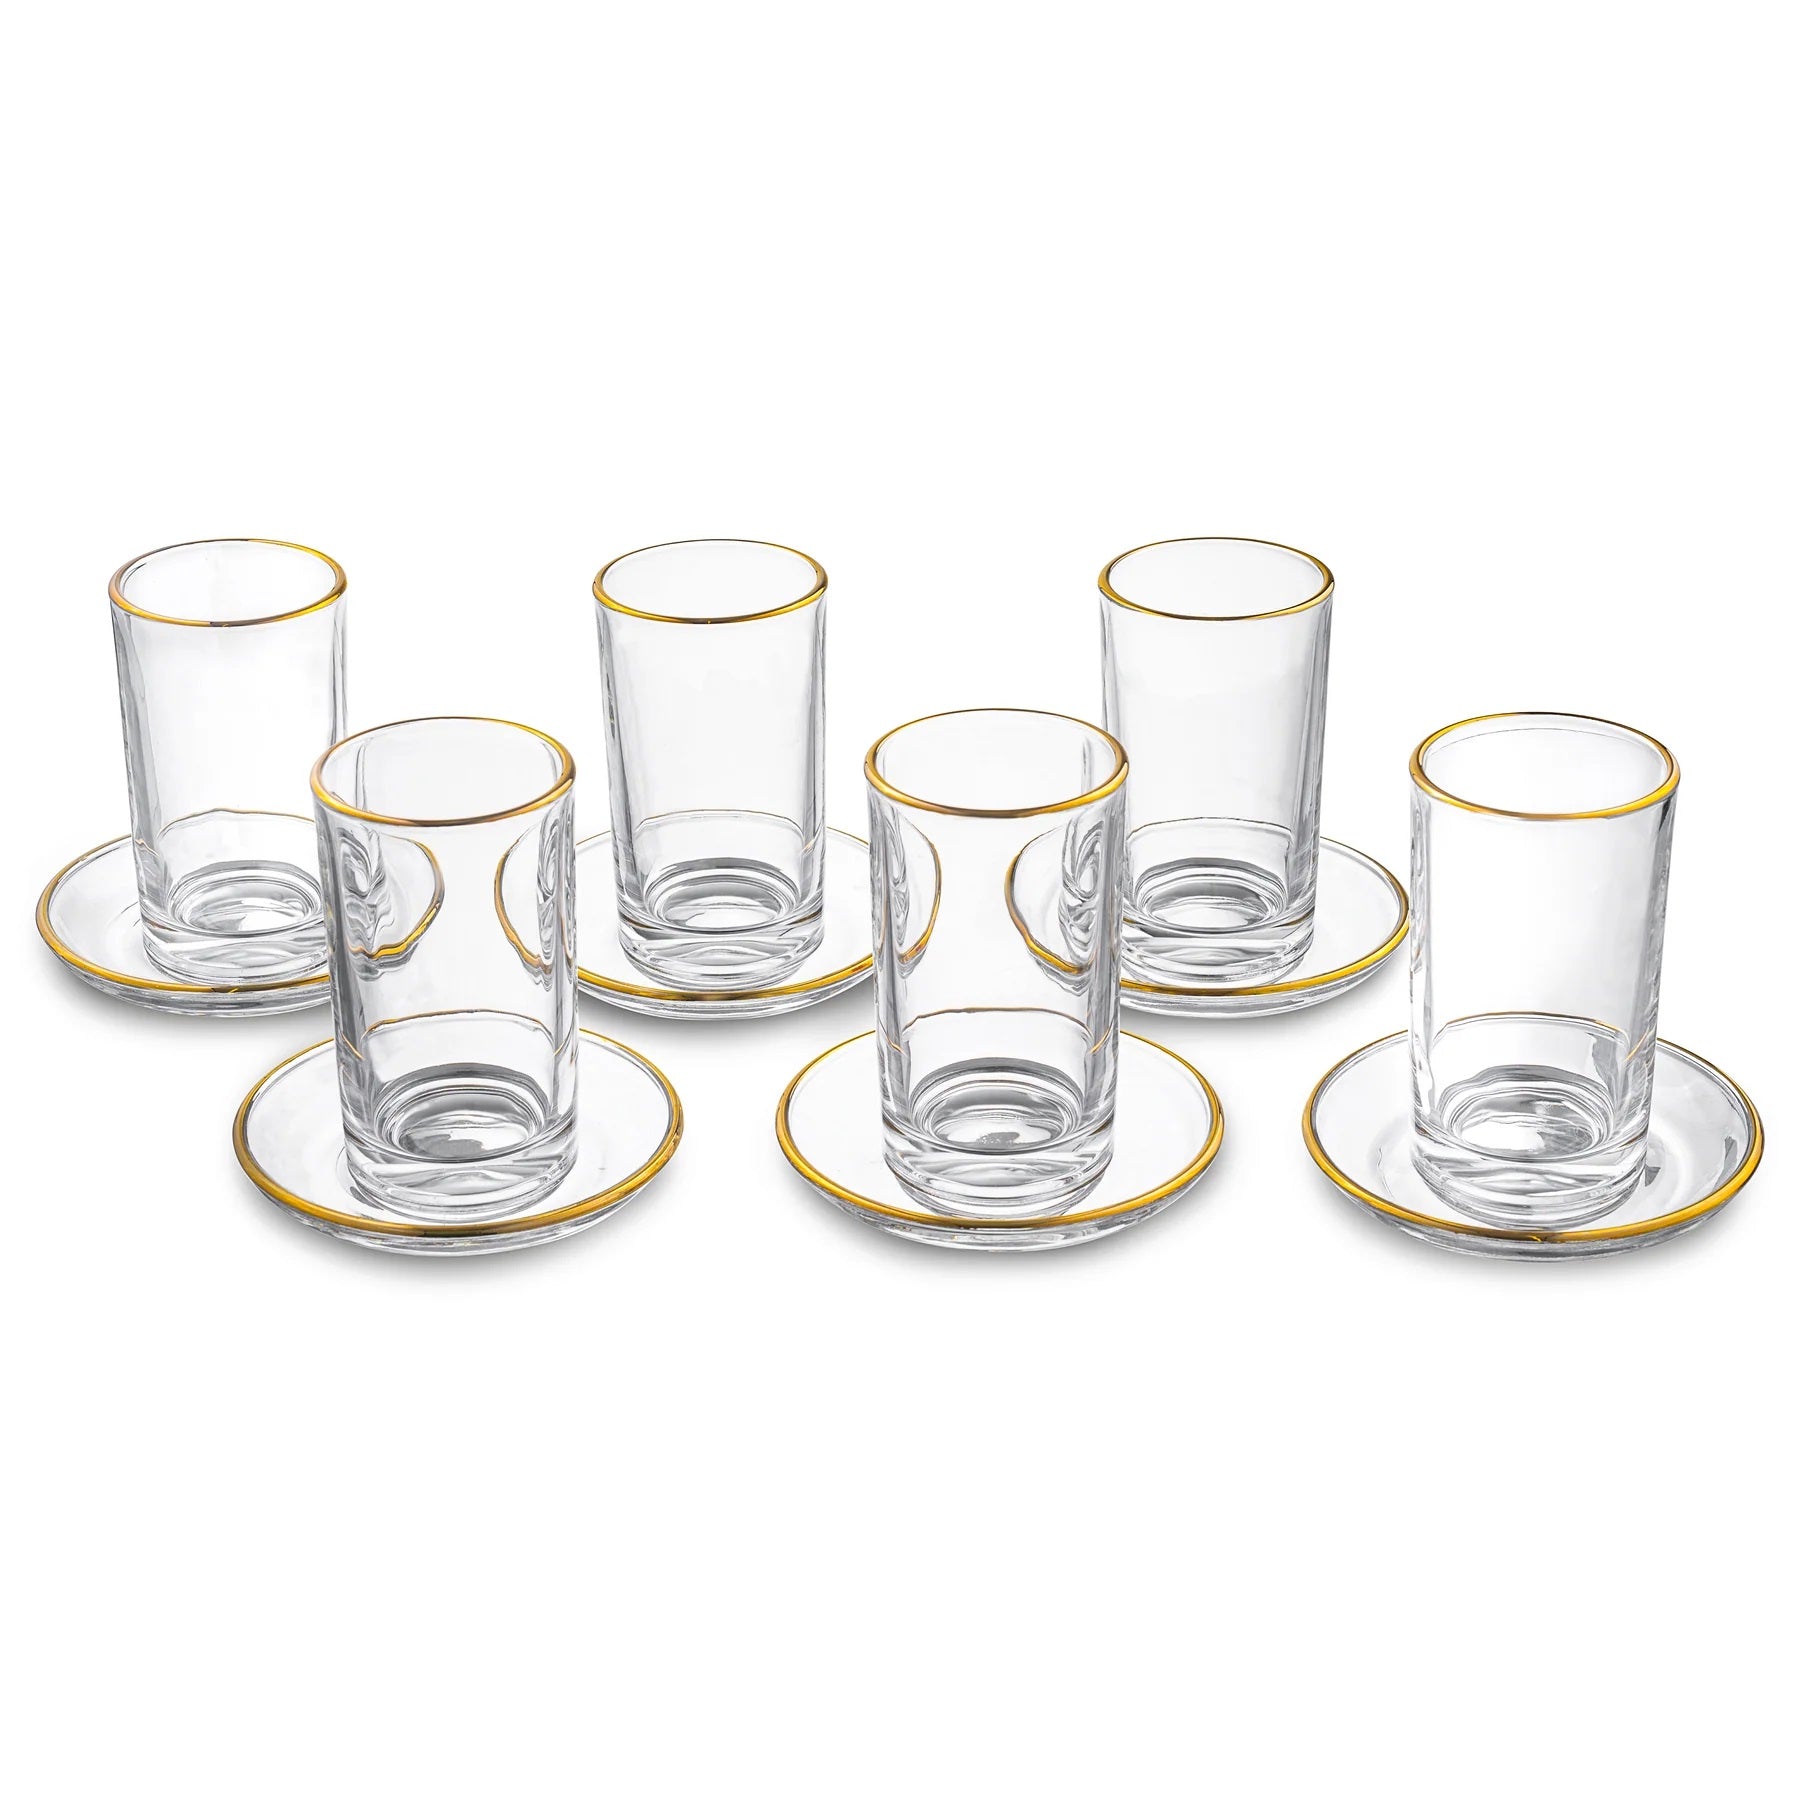 Waterdale Modern Glass Cups & Saucers Gold Rim, Set Of 6